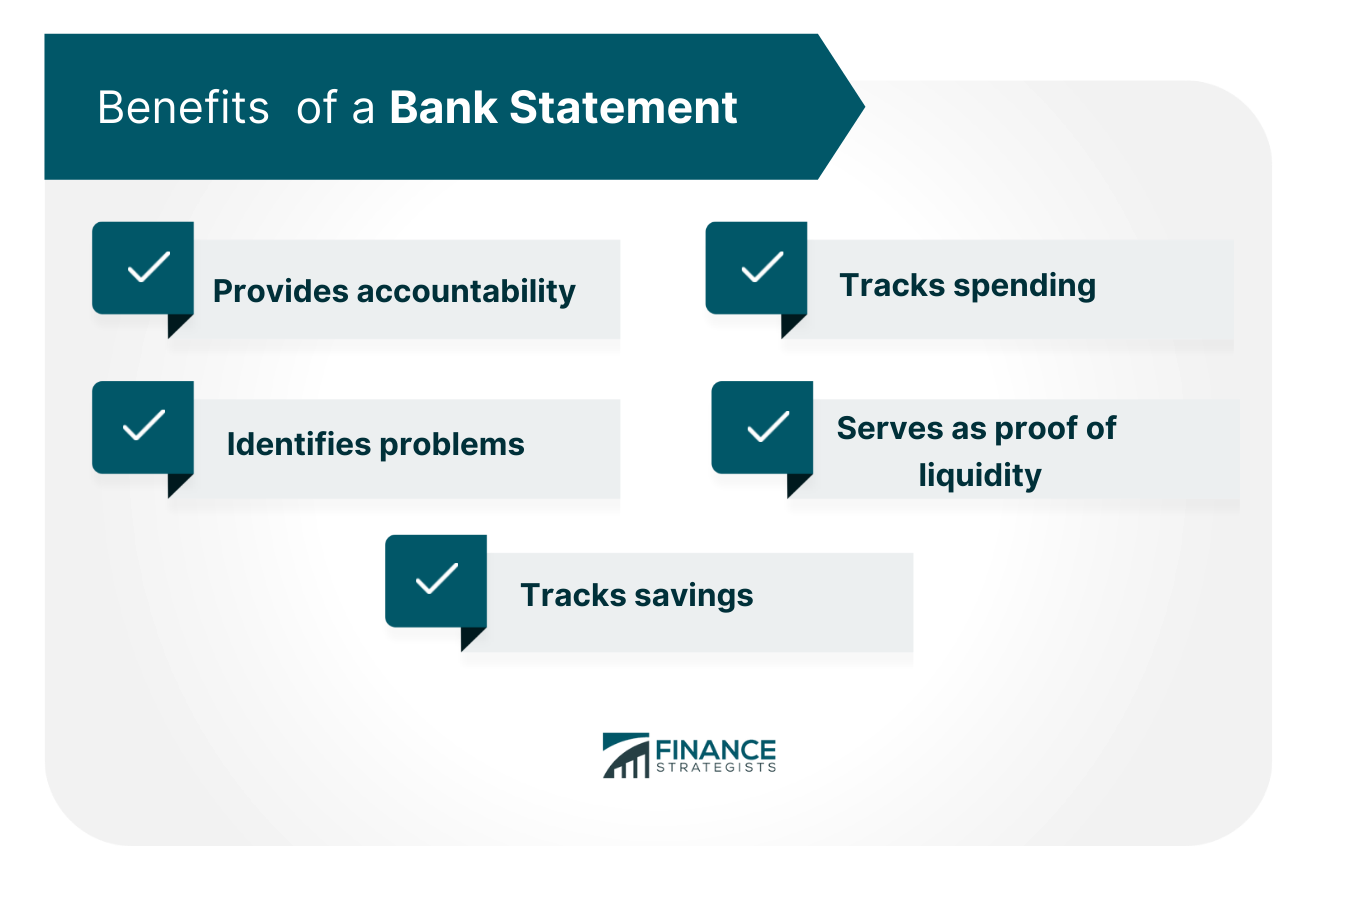 Benefits of a Bank Statement